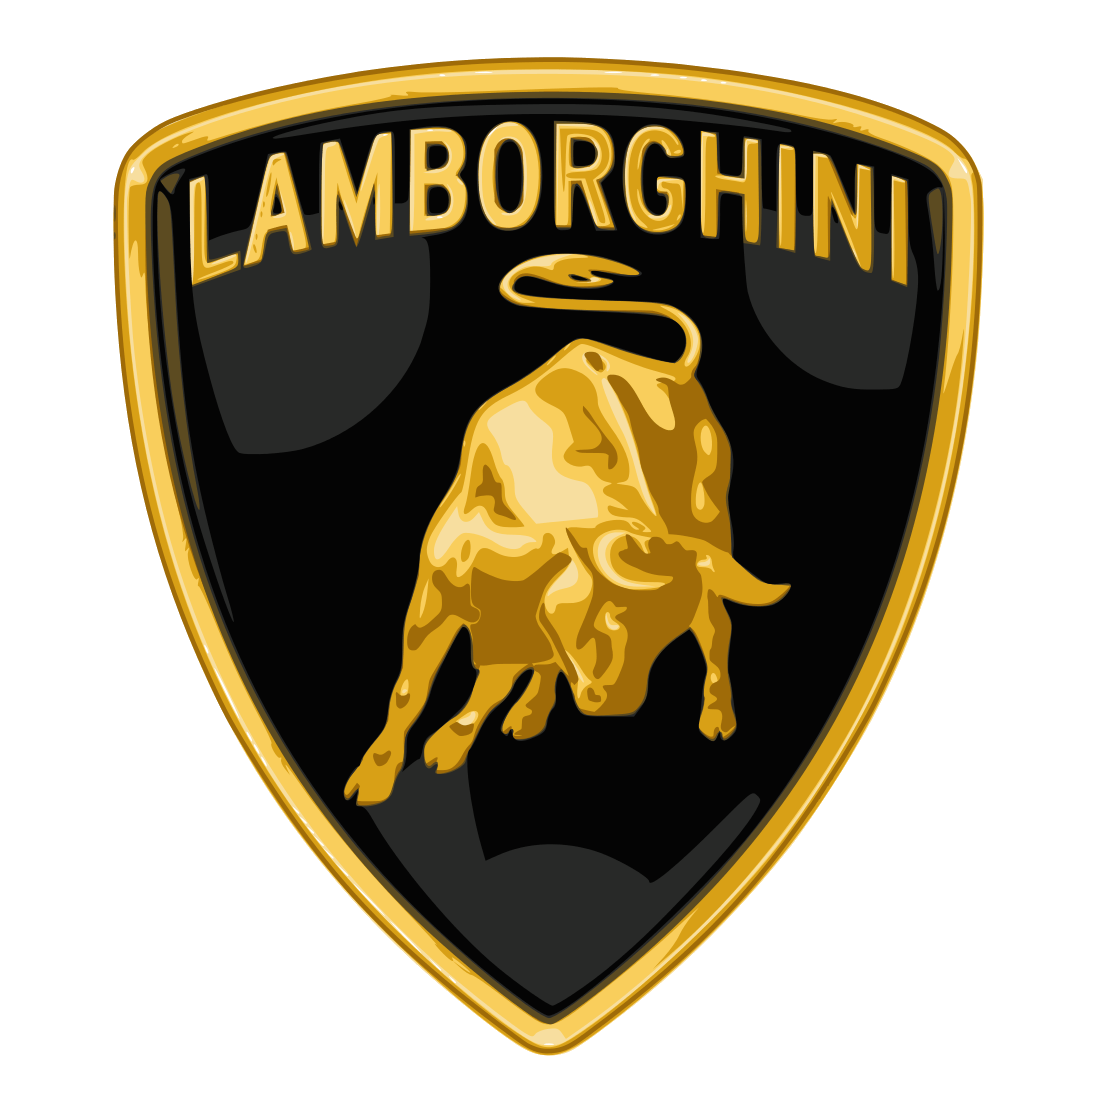 Lanmborghini Logo - Lamborghini Logo, Lamborghini Car Symbol Meaning and History | Car ...